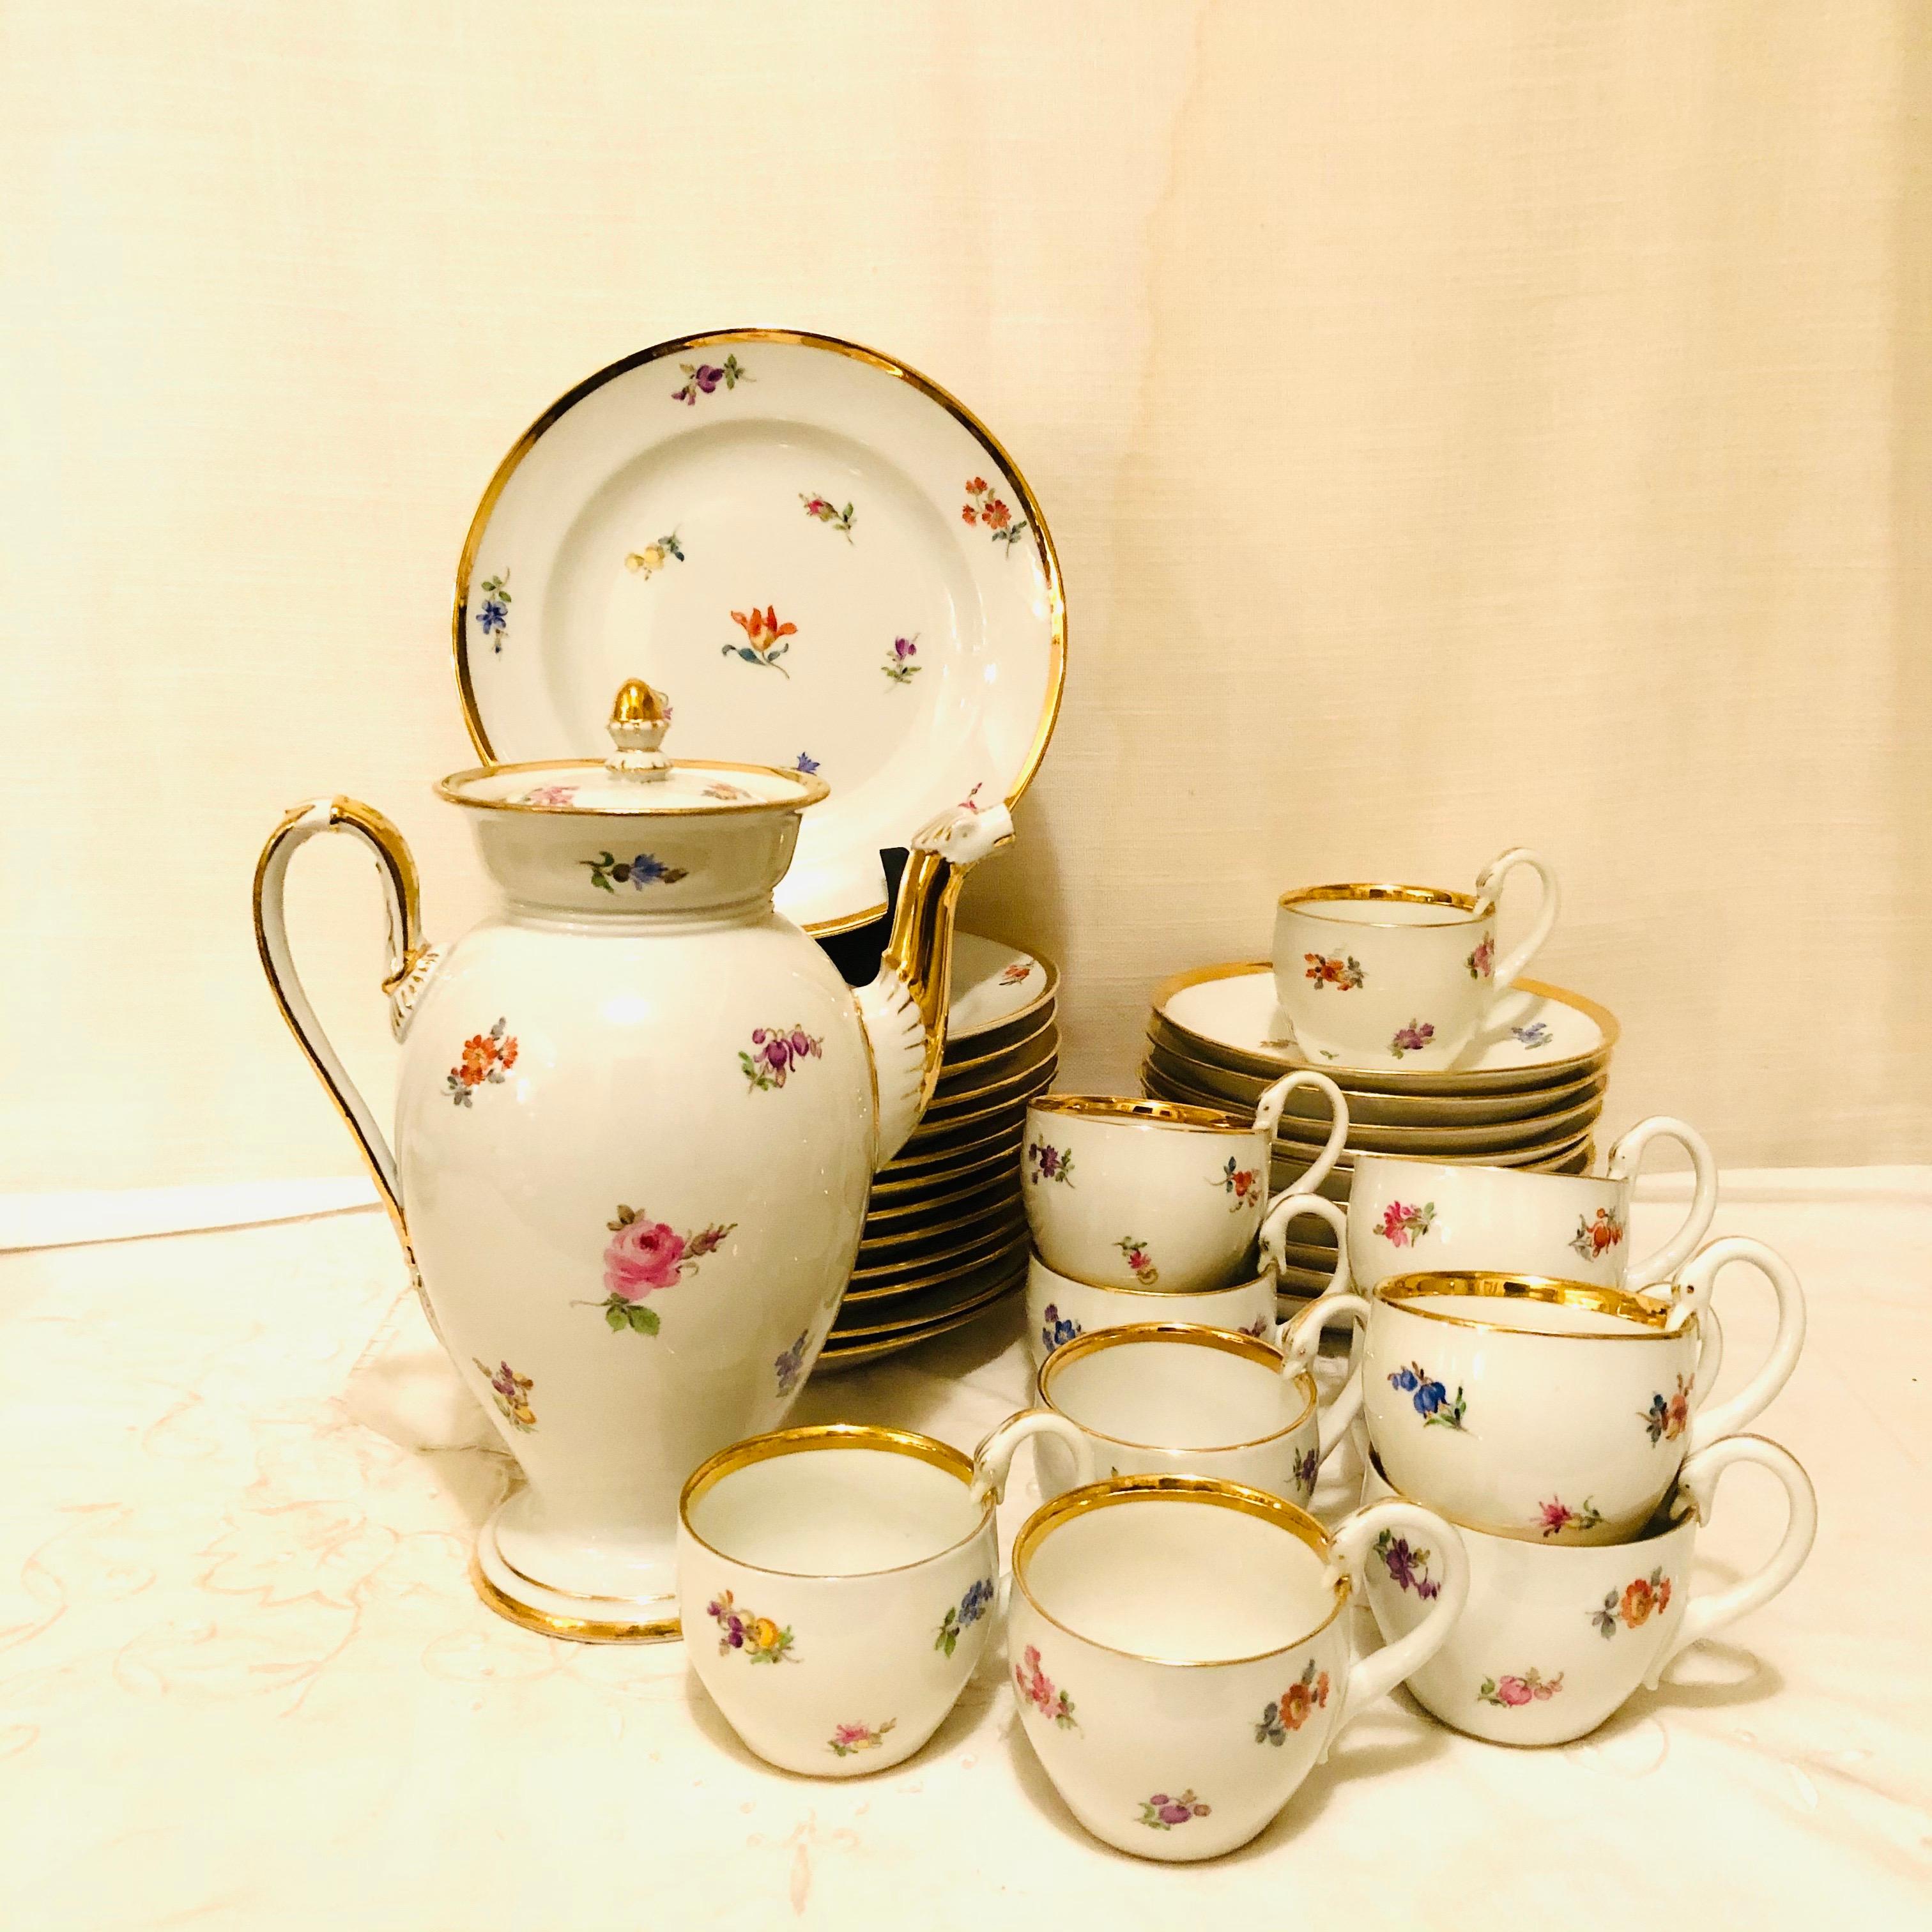 Meissen Streublumen Tea Set for 10 with Cups and Saucers, Cake Plates and Teapot 4